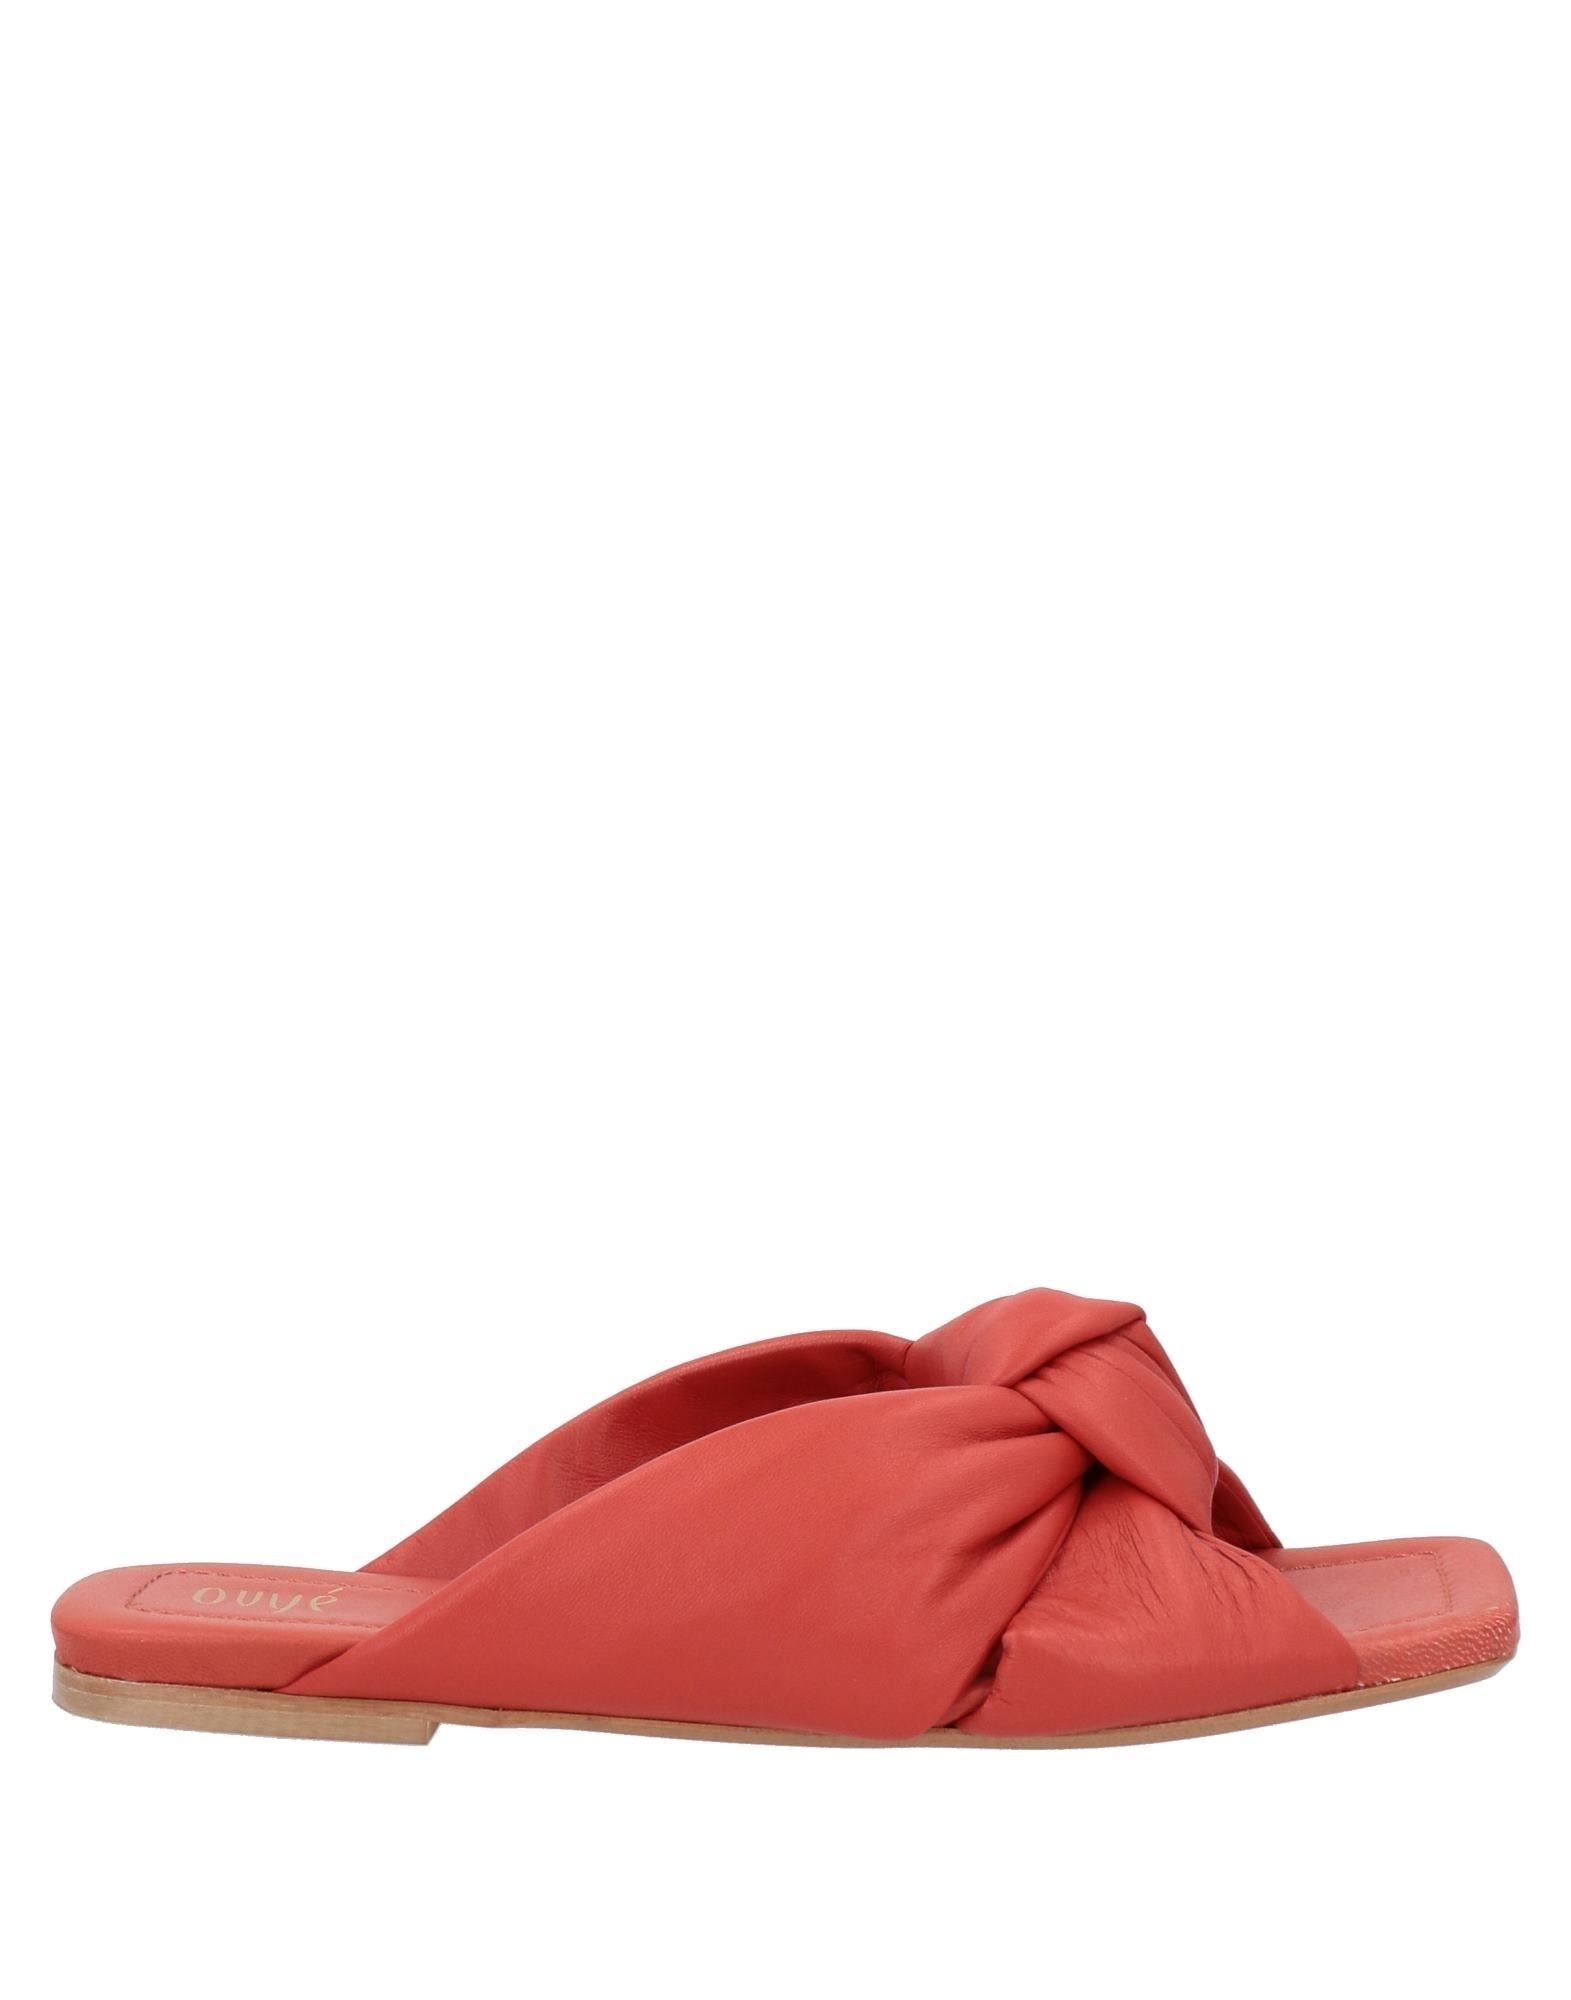 Ovye' By Cristina Lucchi Sandals In Red